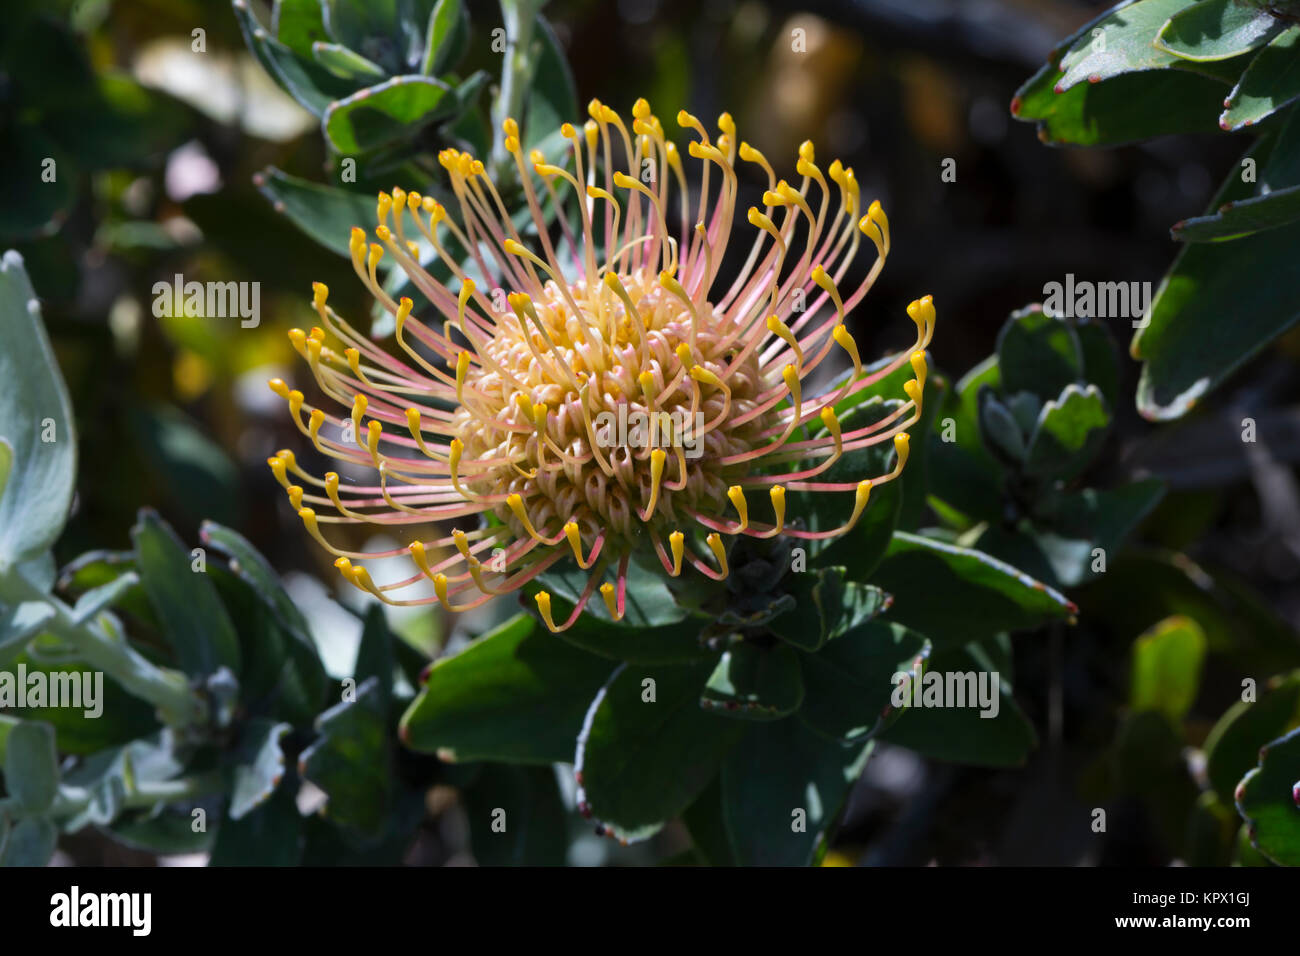 Single Leucospermum Cordifolium, Nodding Pincushion Flowers, which are native to South Africa. In it's natural setting in the garden bed. Stock Photo